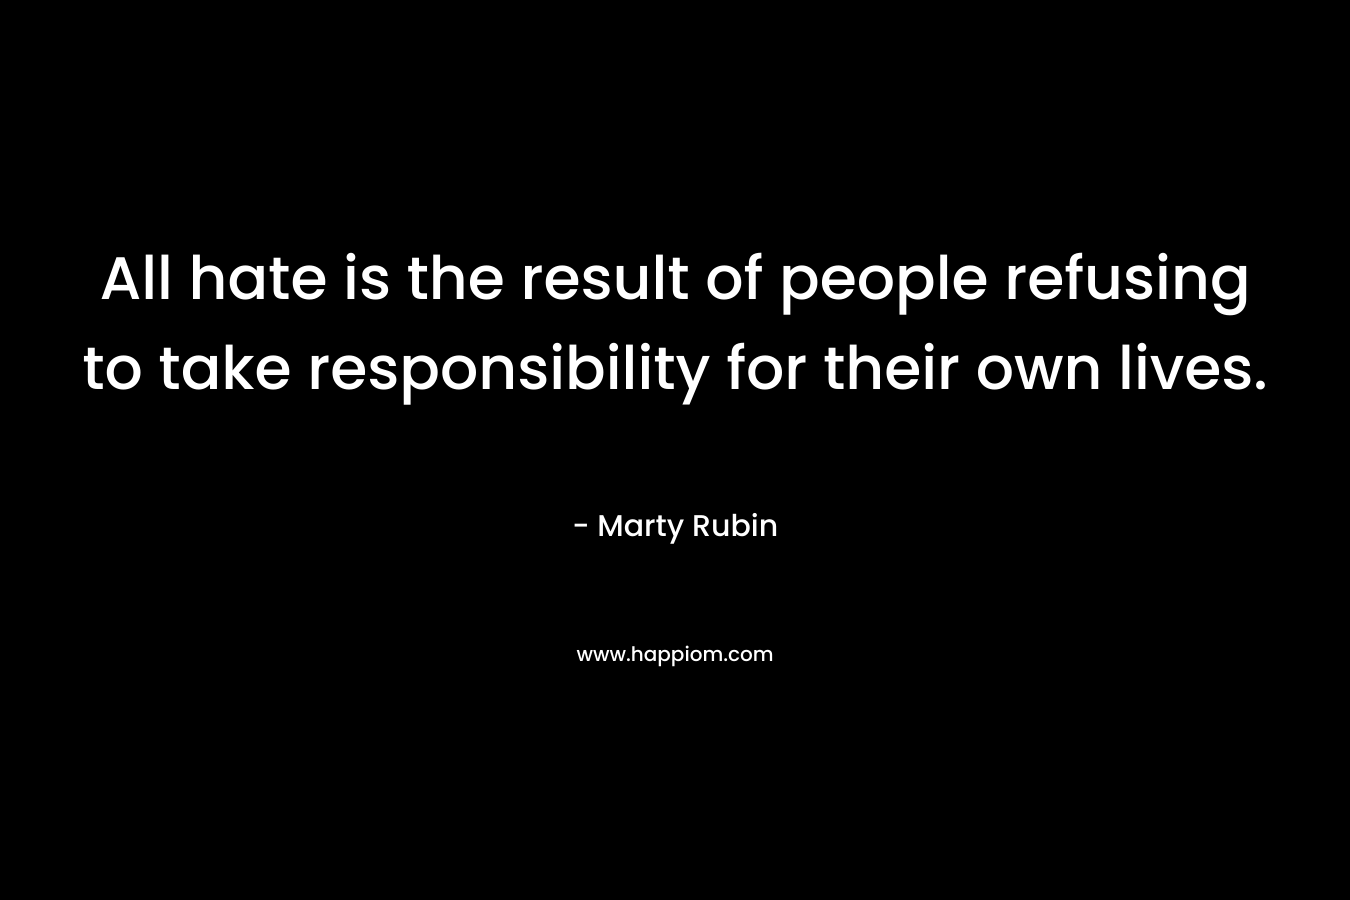 All hate is the result of people refusing to take responsibility for their own lives. – Marty Rubin